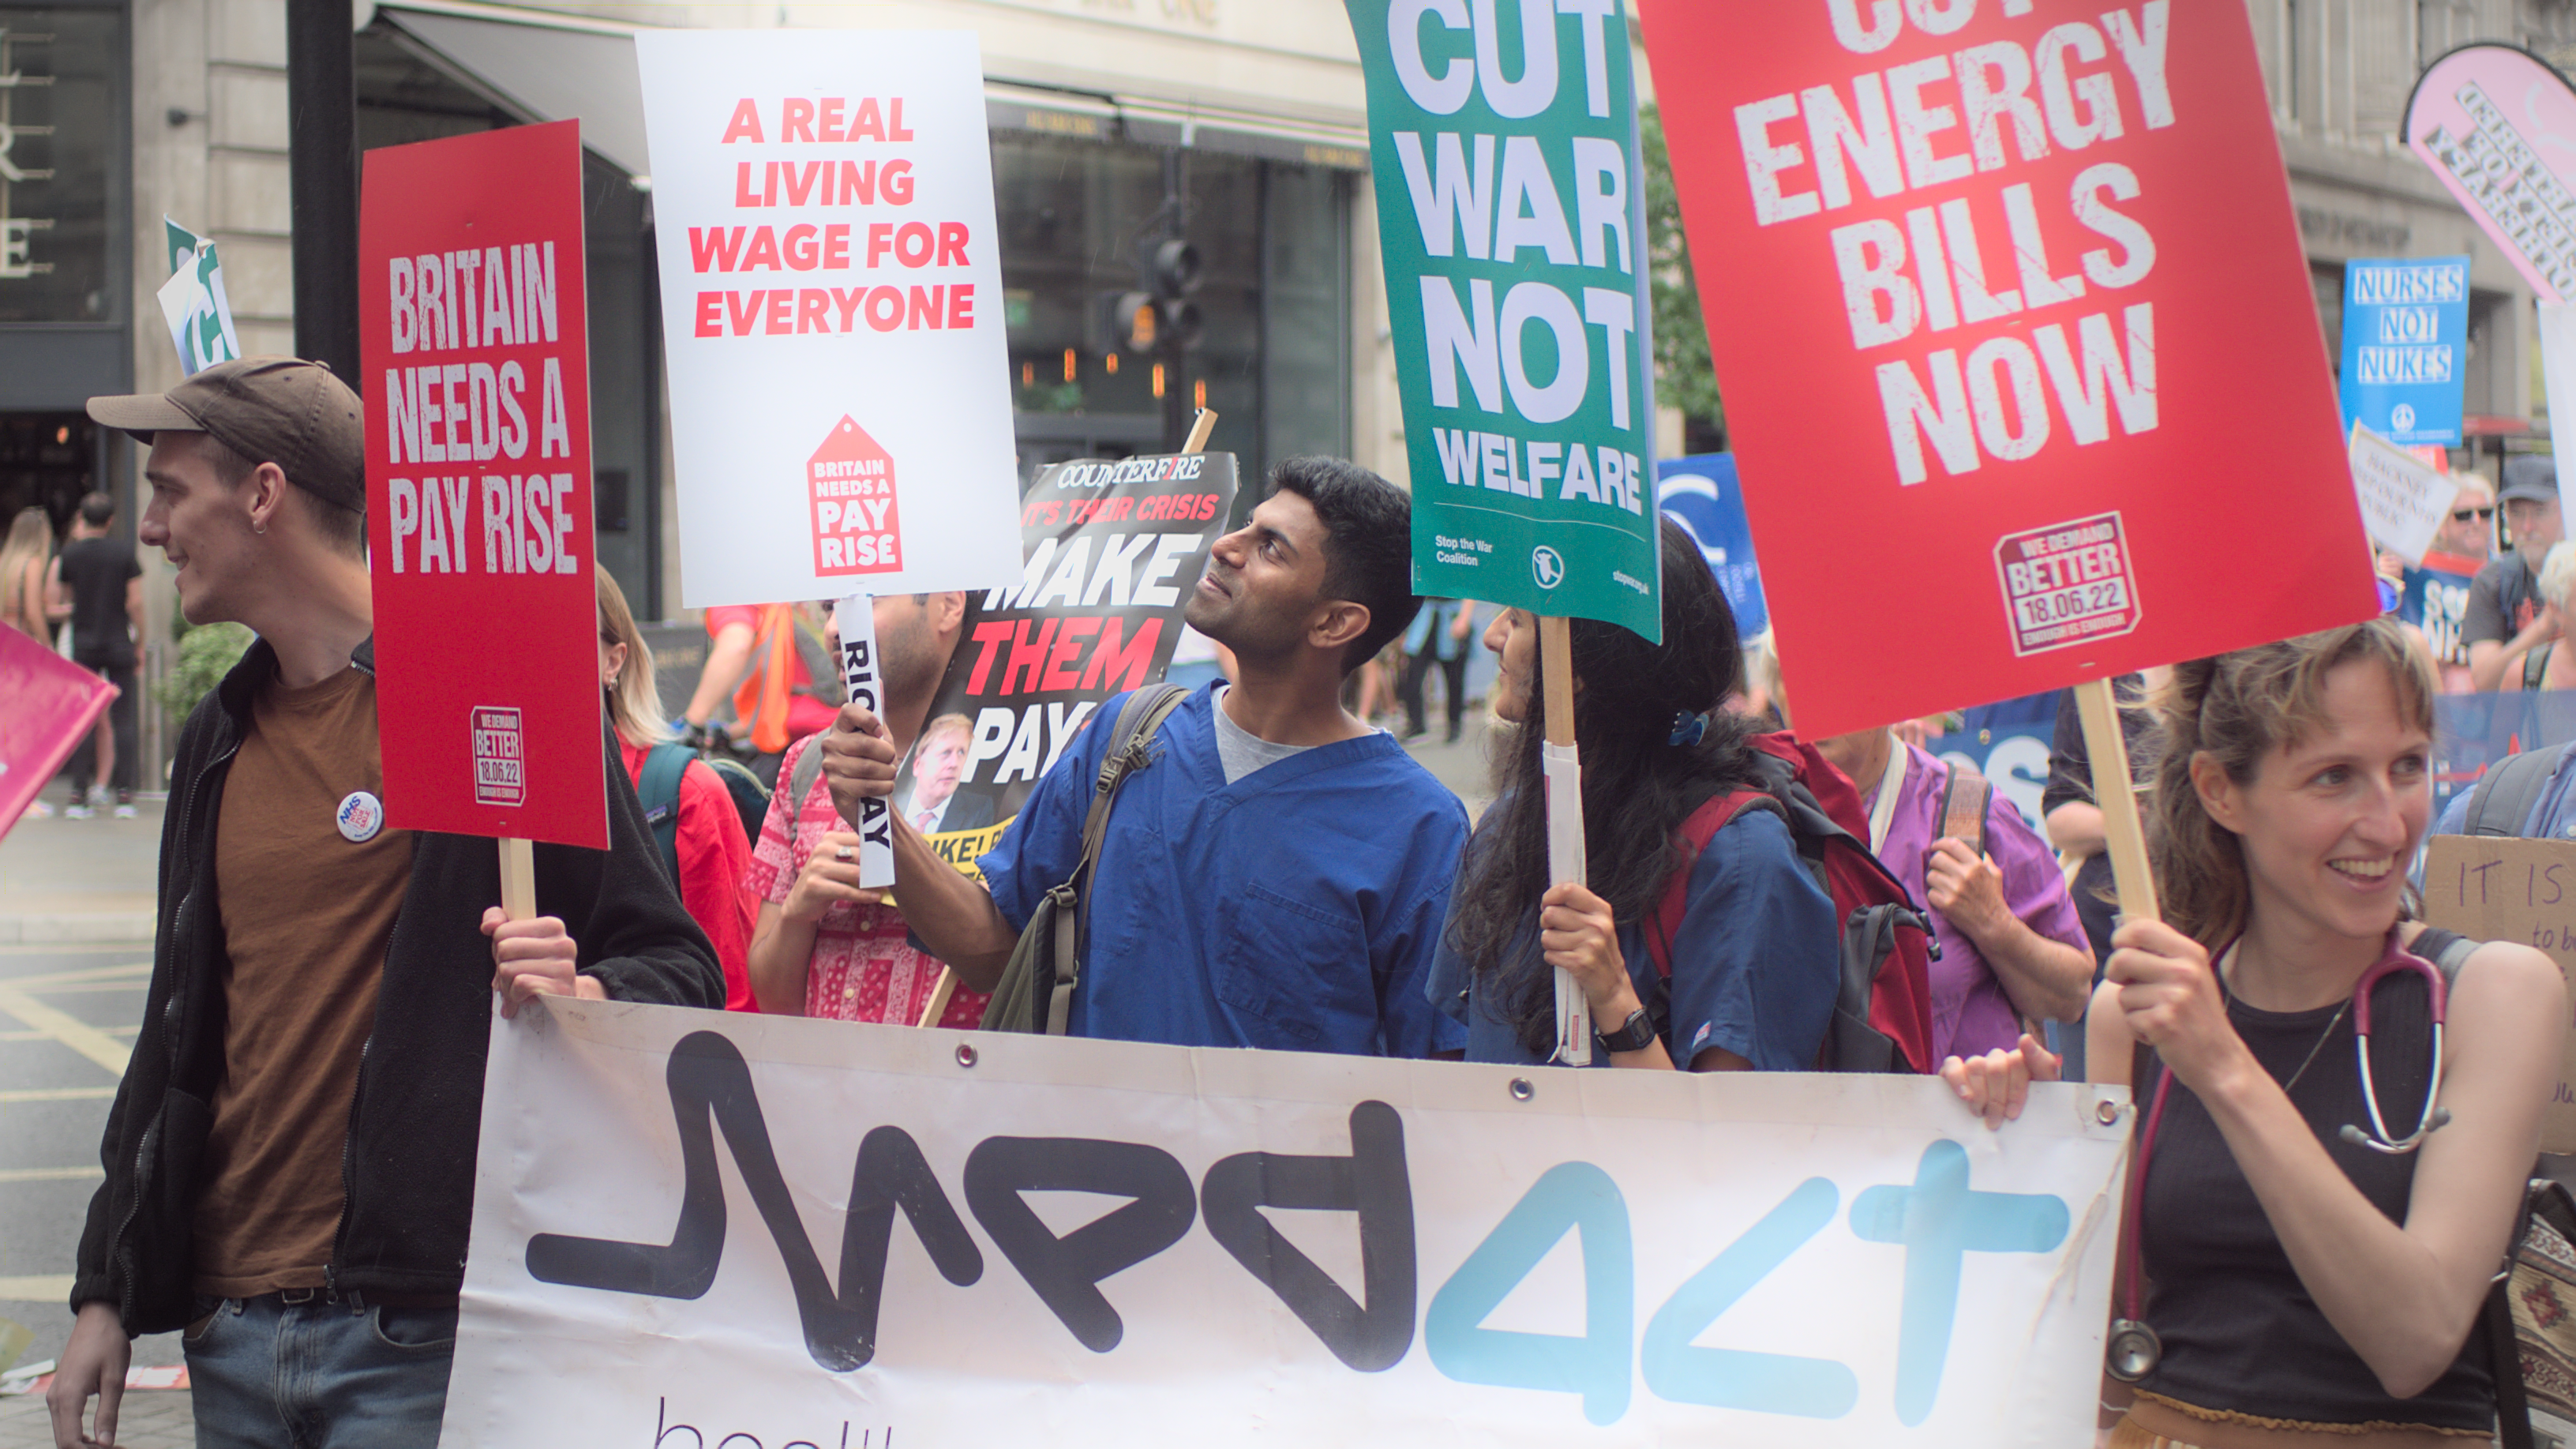 Health workers marching behind a Medact banner. One is wearing scrubs. They are holding placards including 'Britain needs a pay rise', 'Cut war not welfare', 'Cut energy bills now', and 'A real living wage for everyone'.